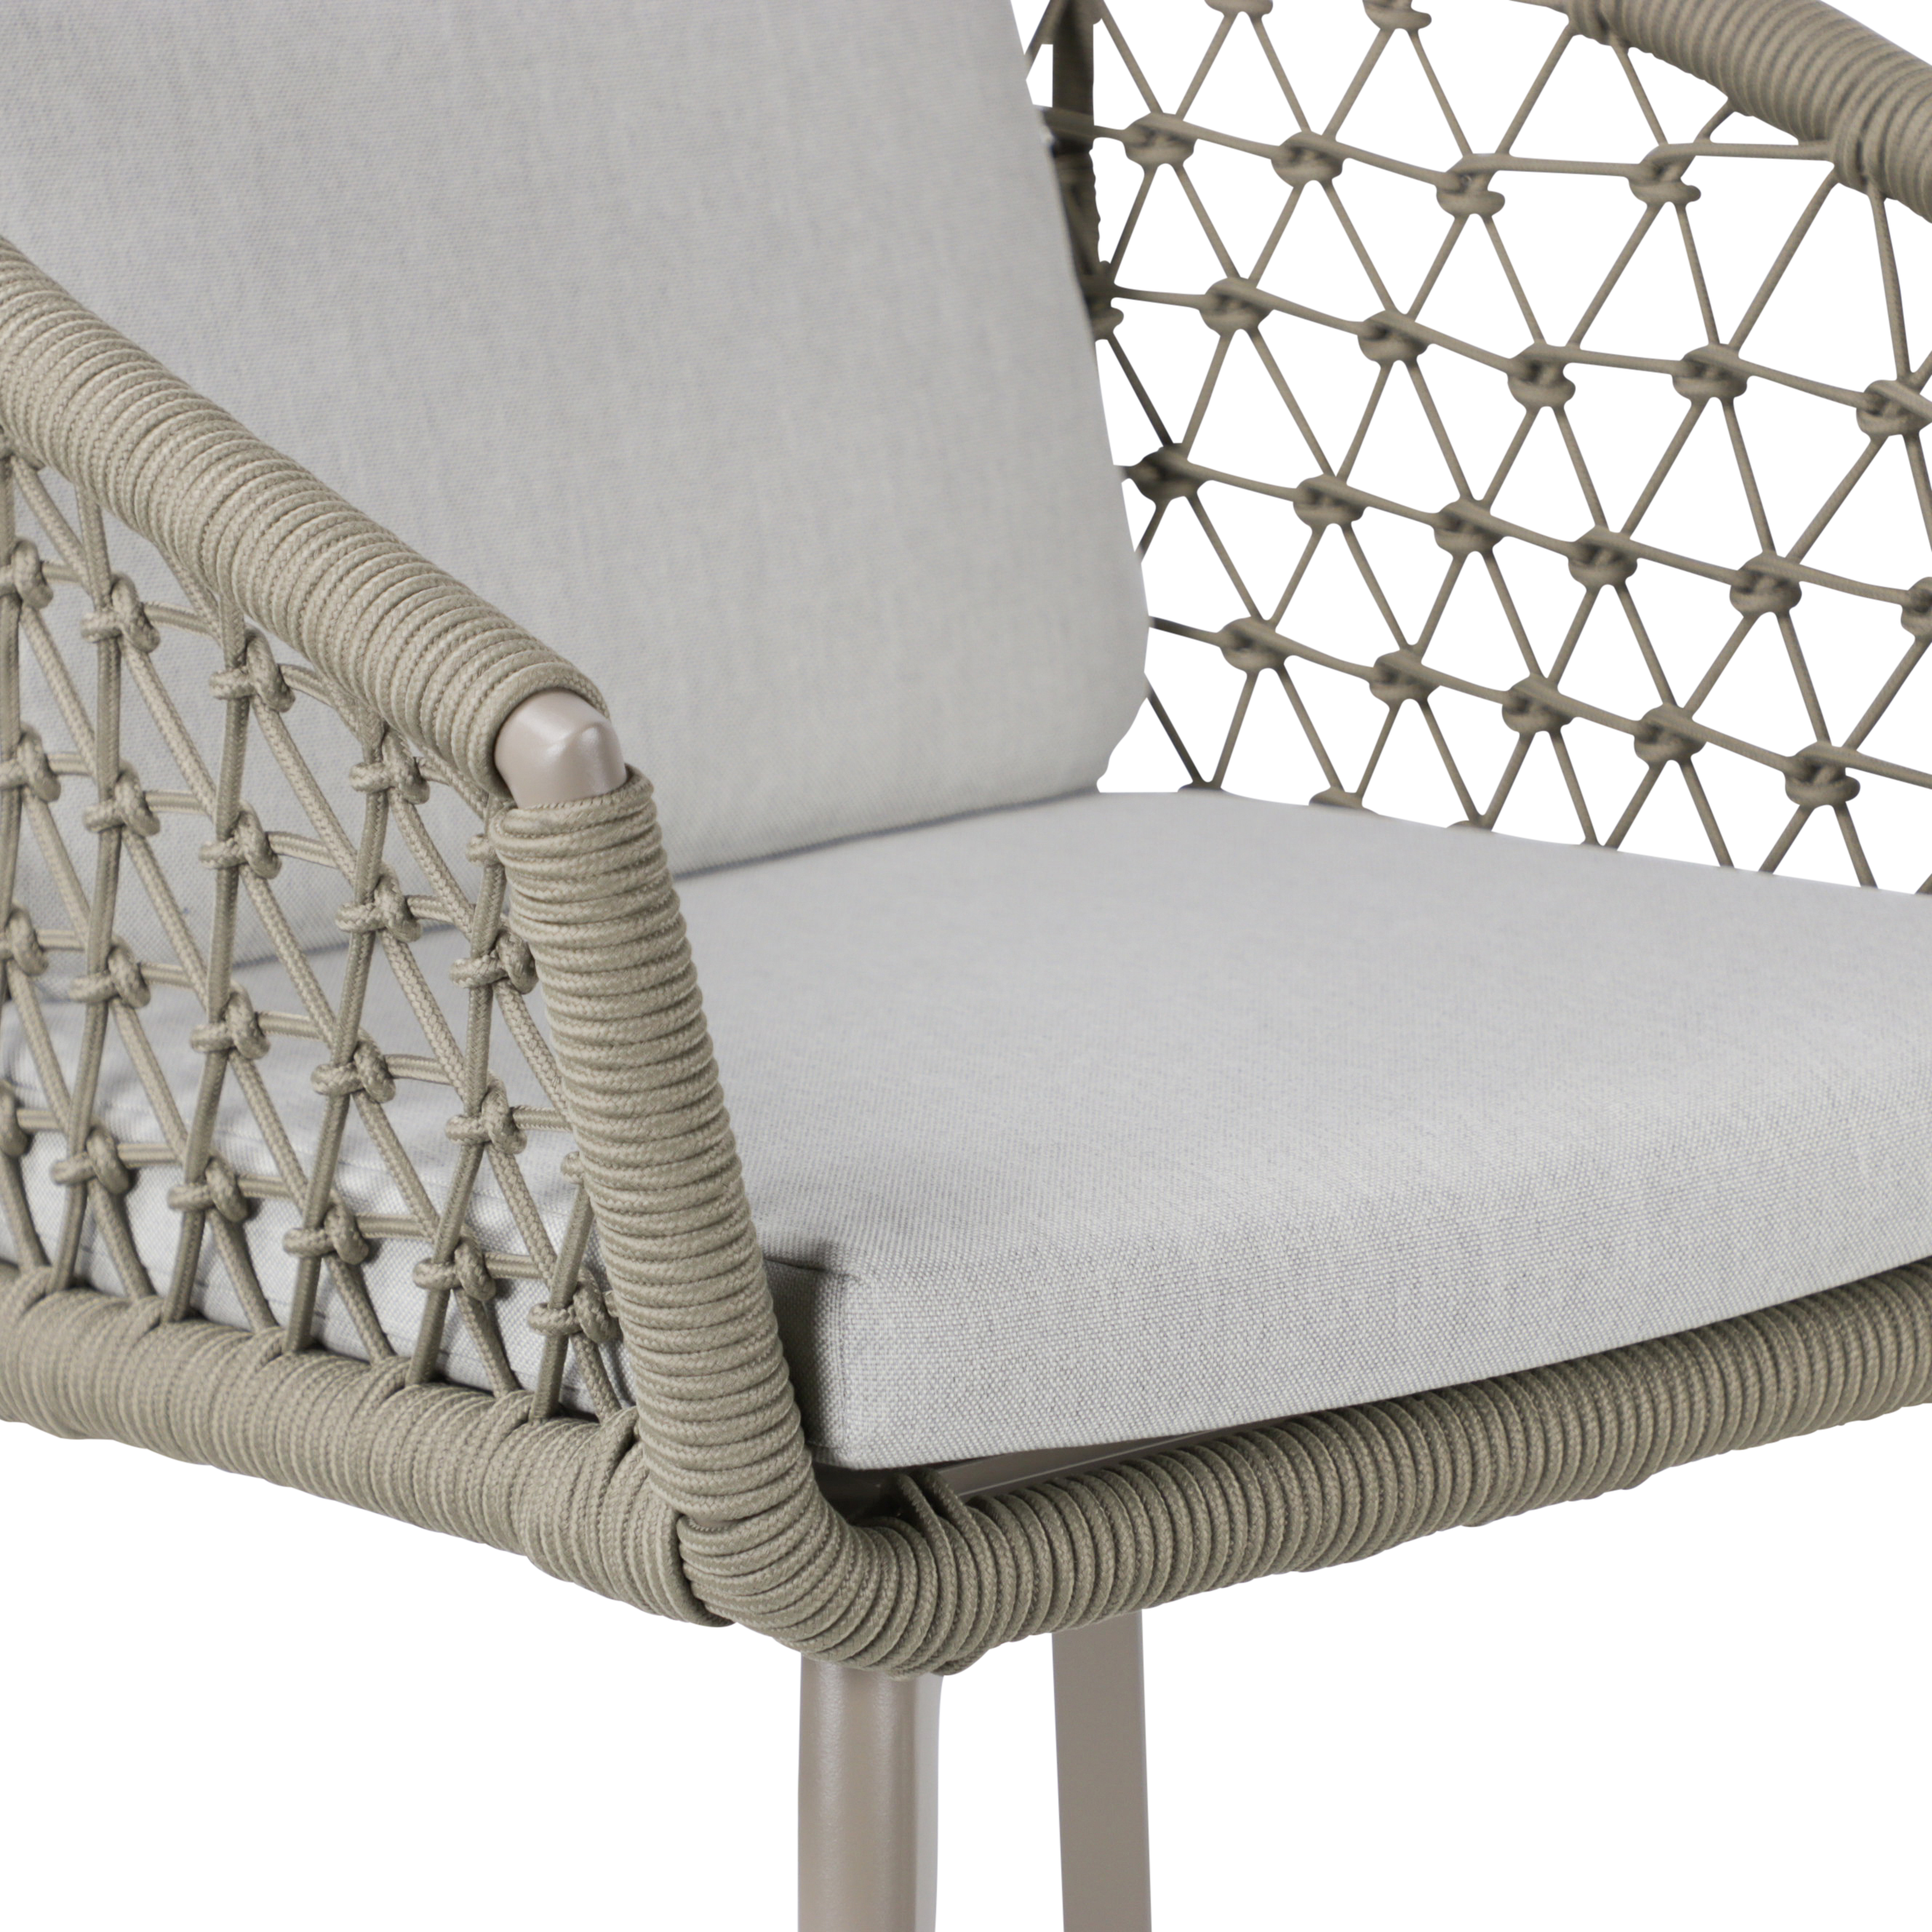 Antigua Dining Chair in Taupe with Dune Olefin Cushions and Rope